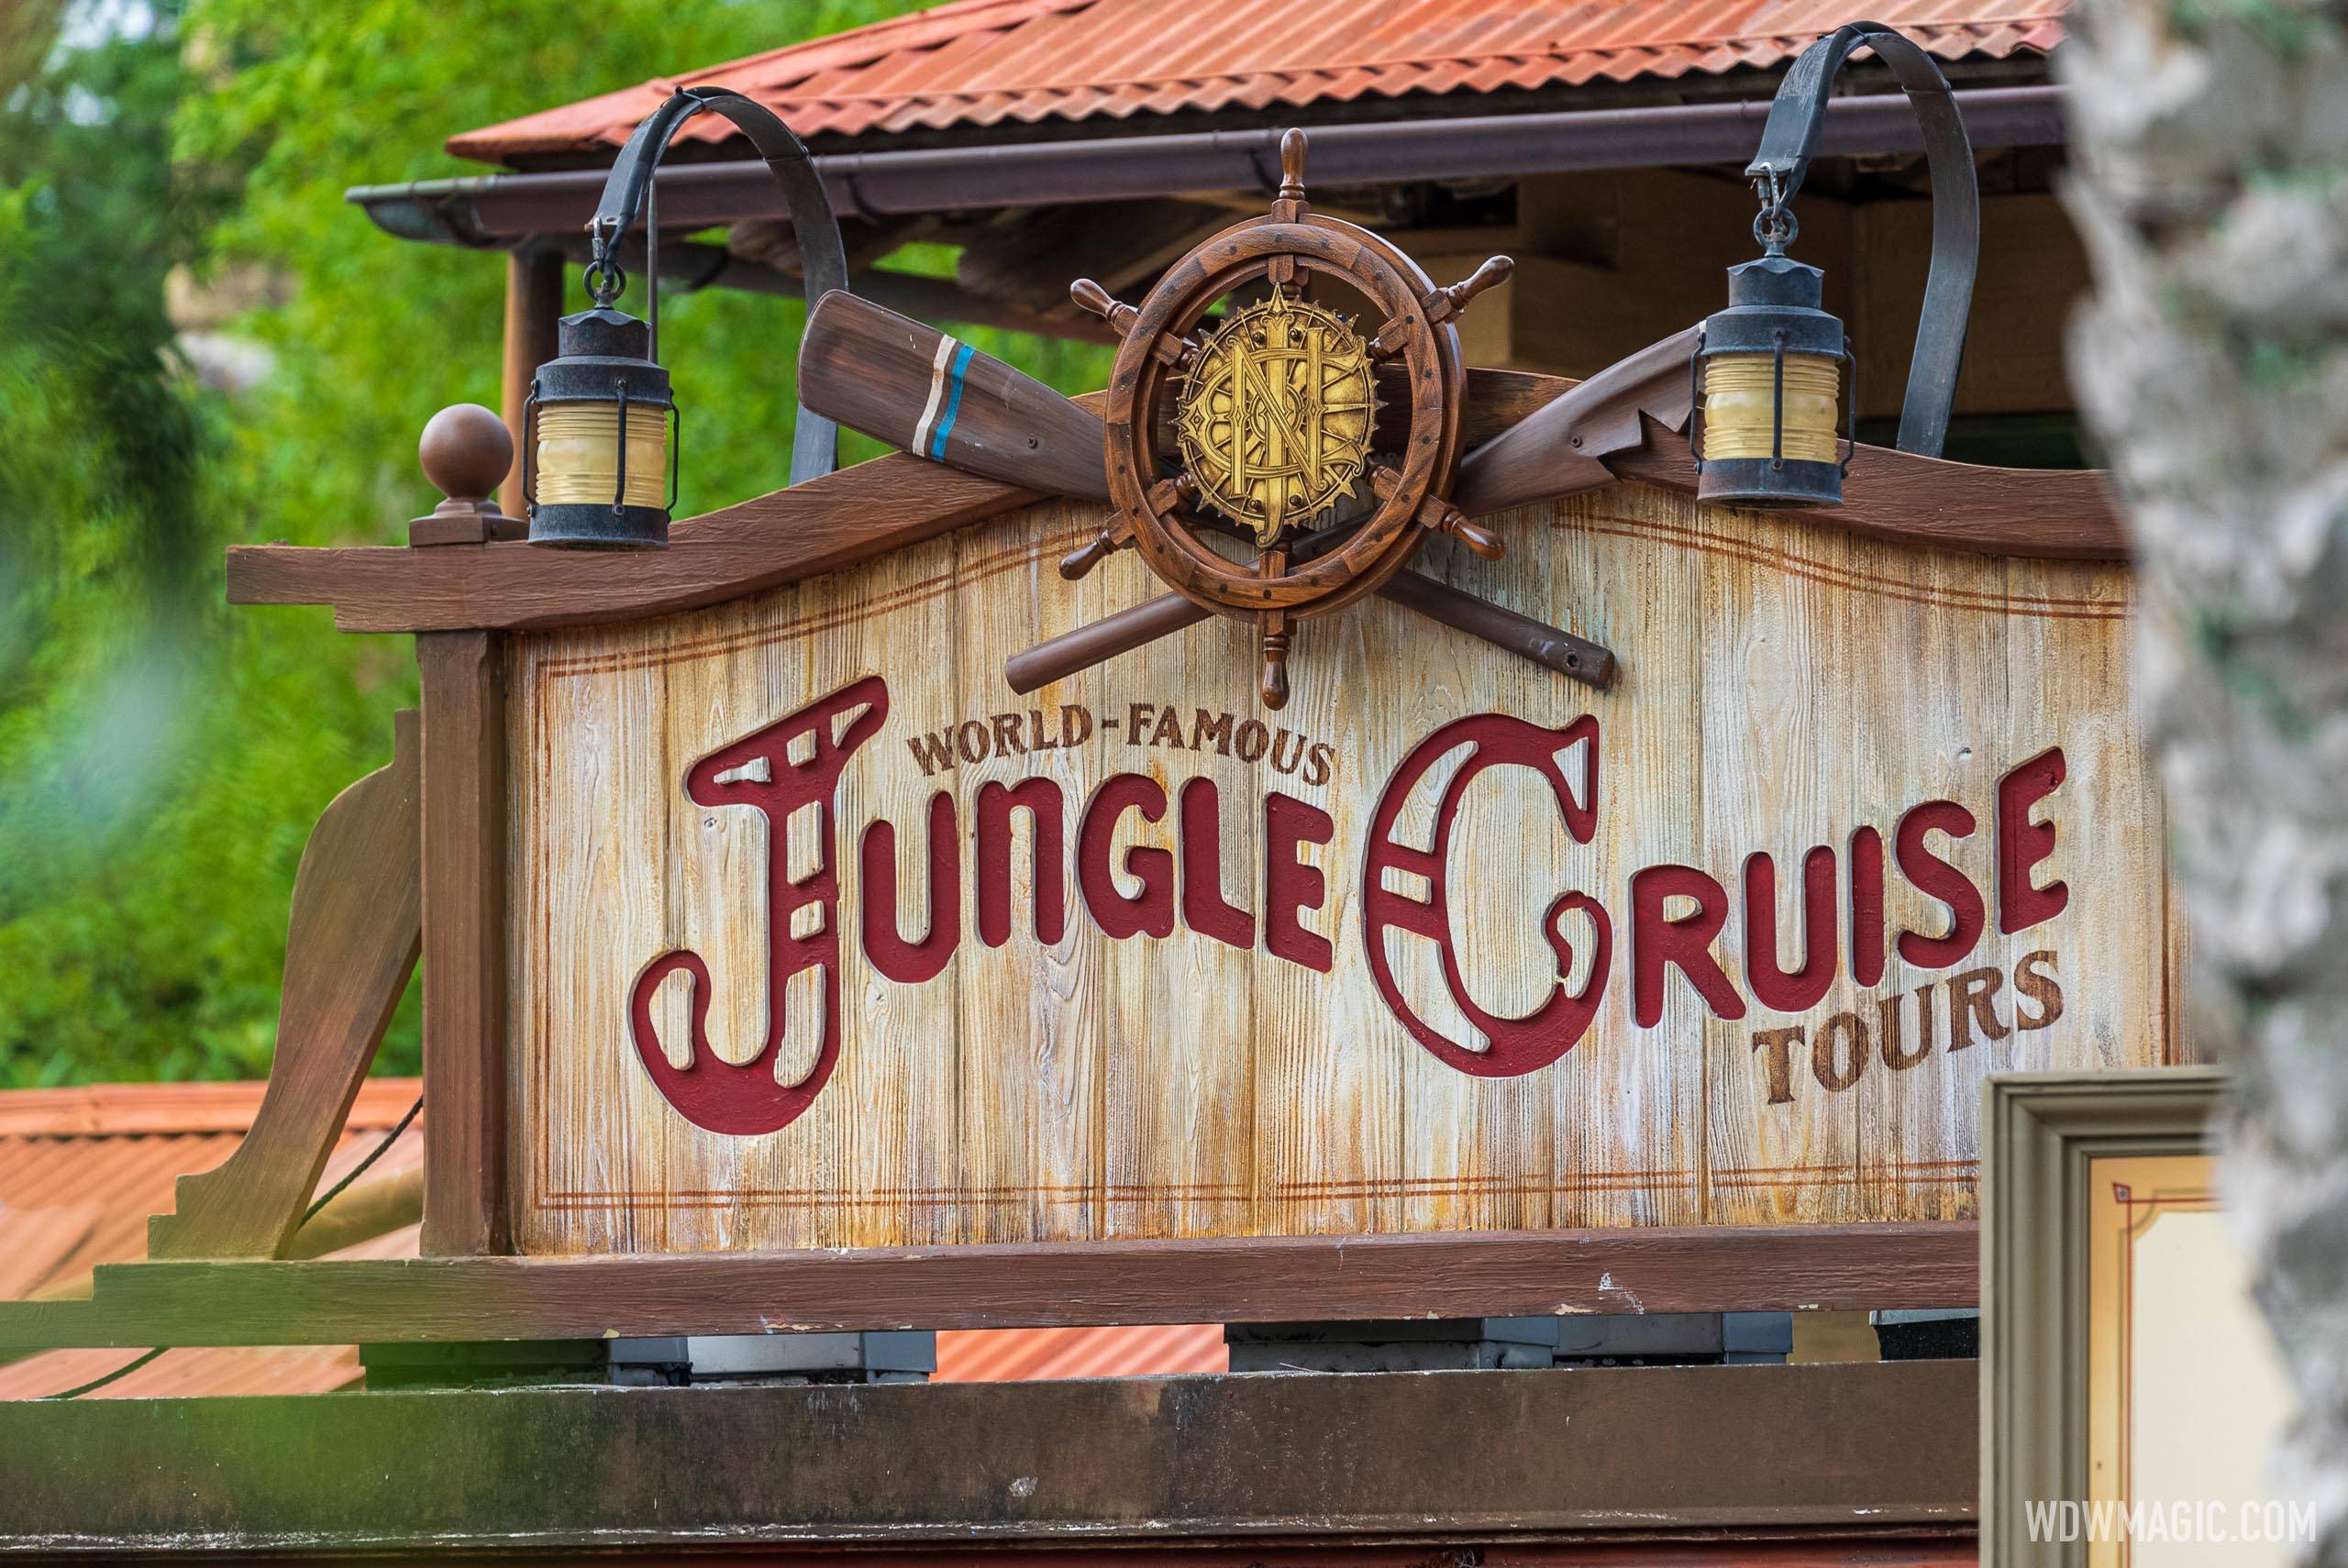 Disney updates the Magic Kingdom's Jungle Cruise marquee sign with another new look